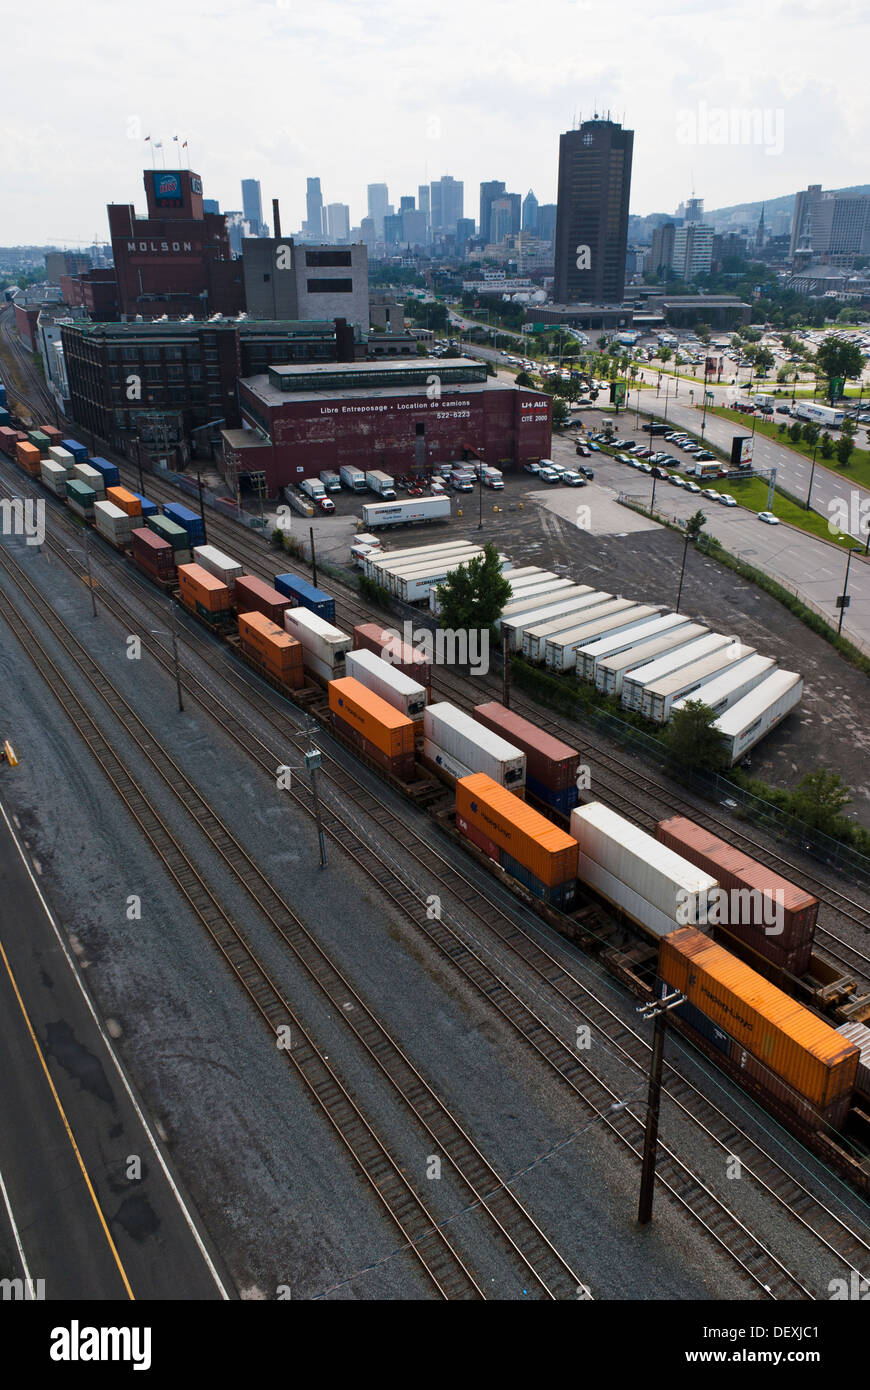 Container freight trains in the port of Montreal, city skyline in the background. Montreal, Quebec, Canada. Stock Photo